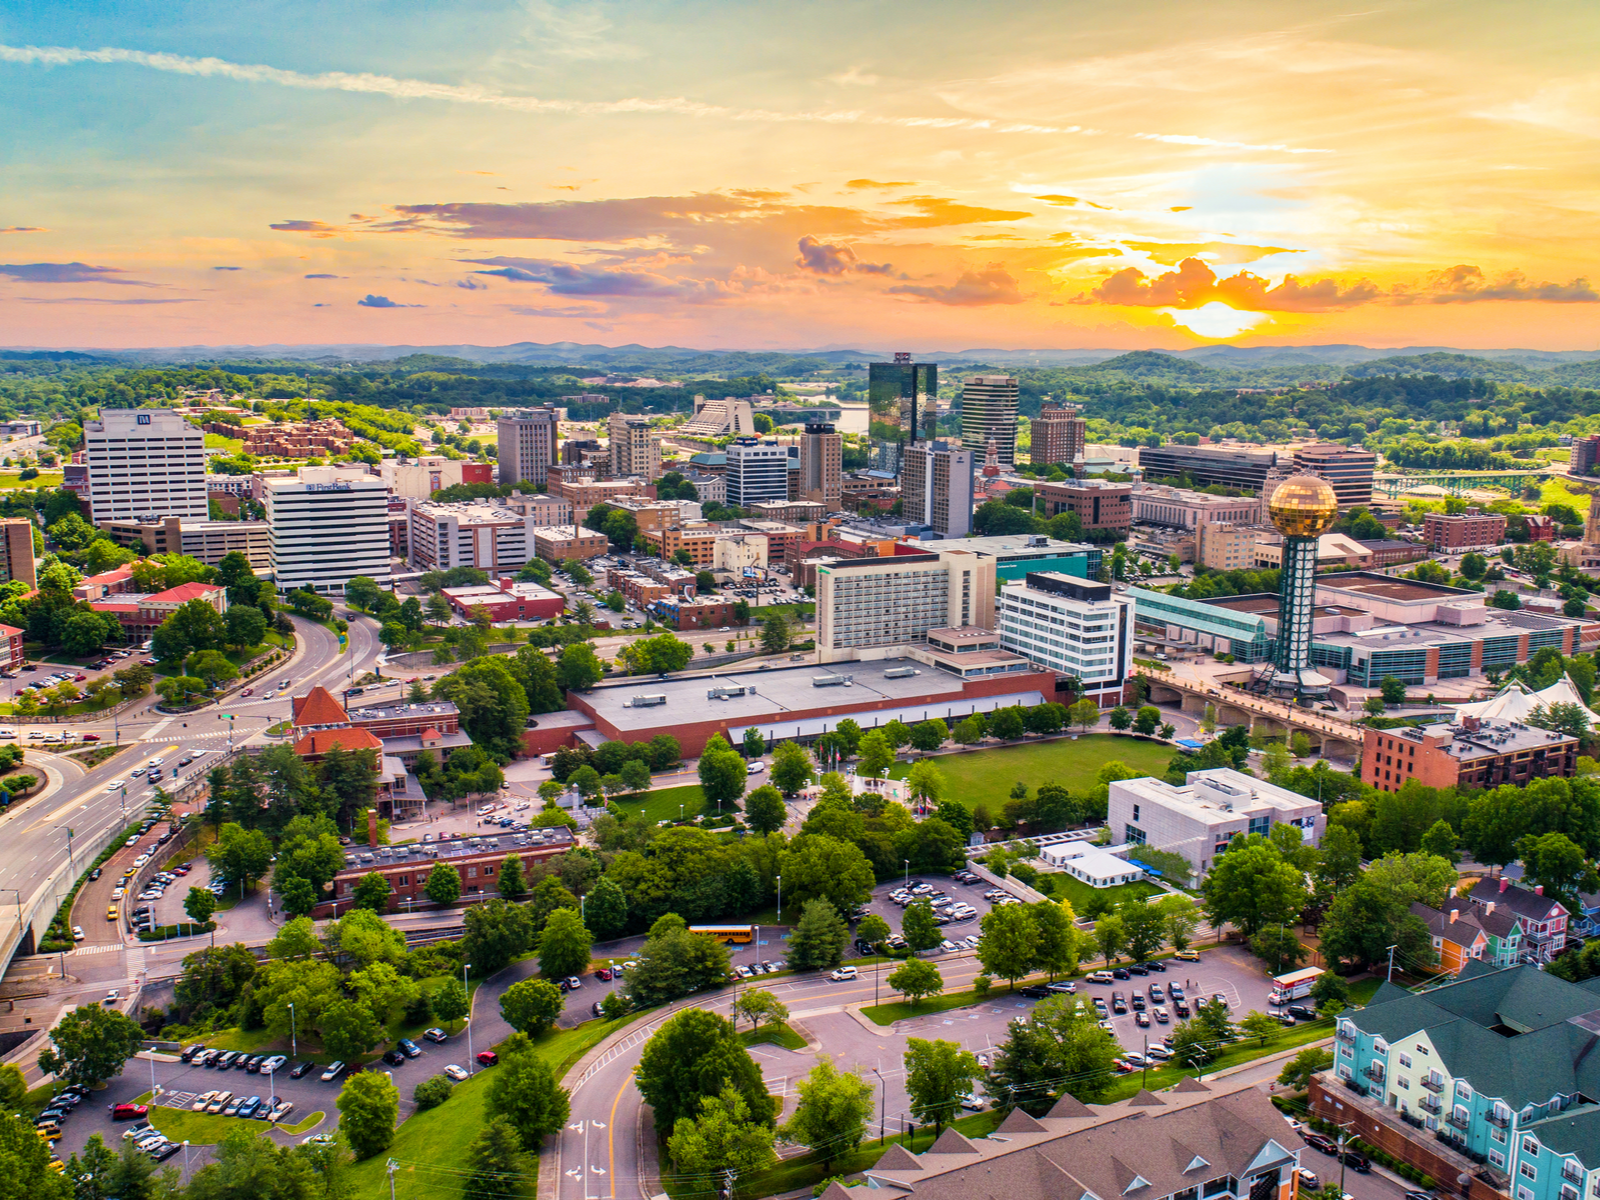 Aerial view on one of the best places to visit in Tennessee, Knoxville's downtown skyline during a golden sunset